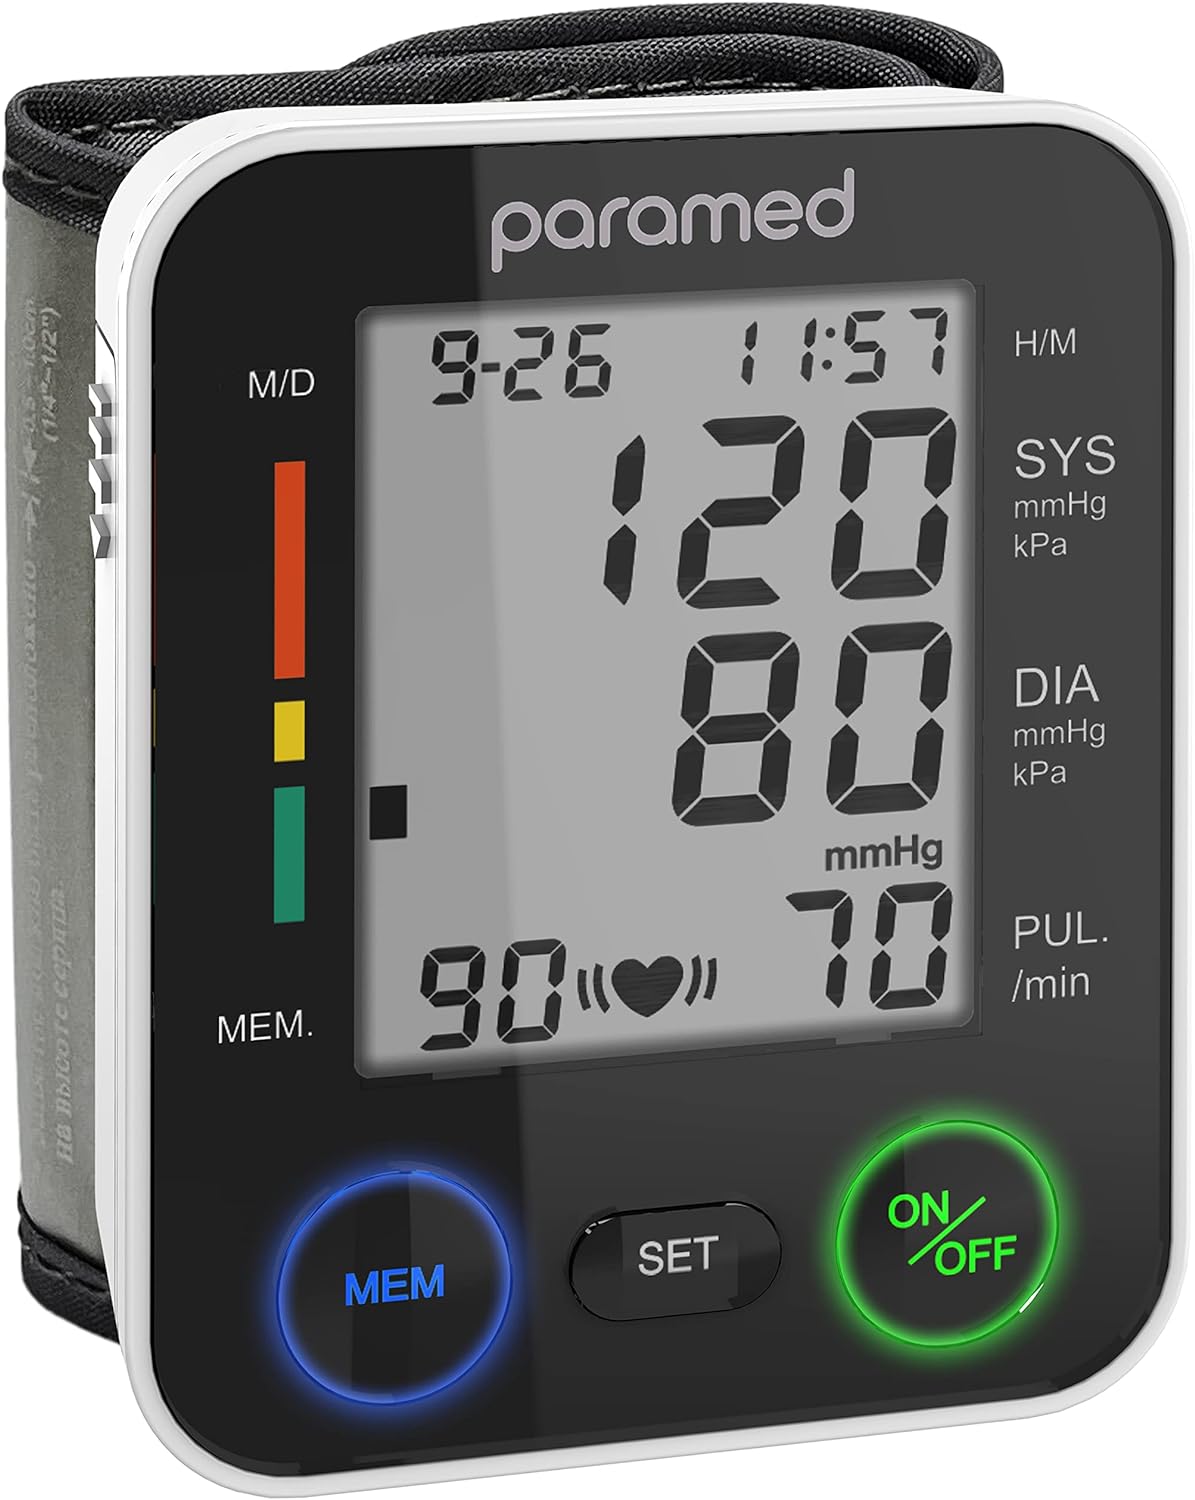 PARAMED Automatic Wrist Blood Pressure Monitor: Blood-Pressure Kit of Bp Cuff + 2AAA and Carrying case - Irregular Heartbeat Detector 90 Readings Memory Function Large Display